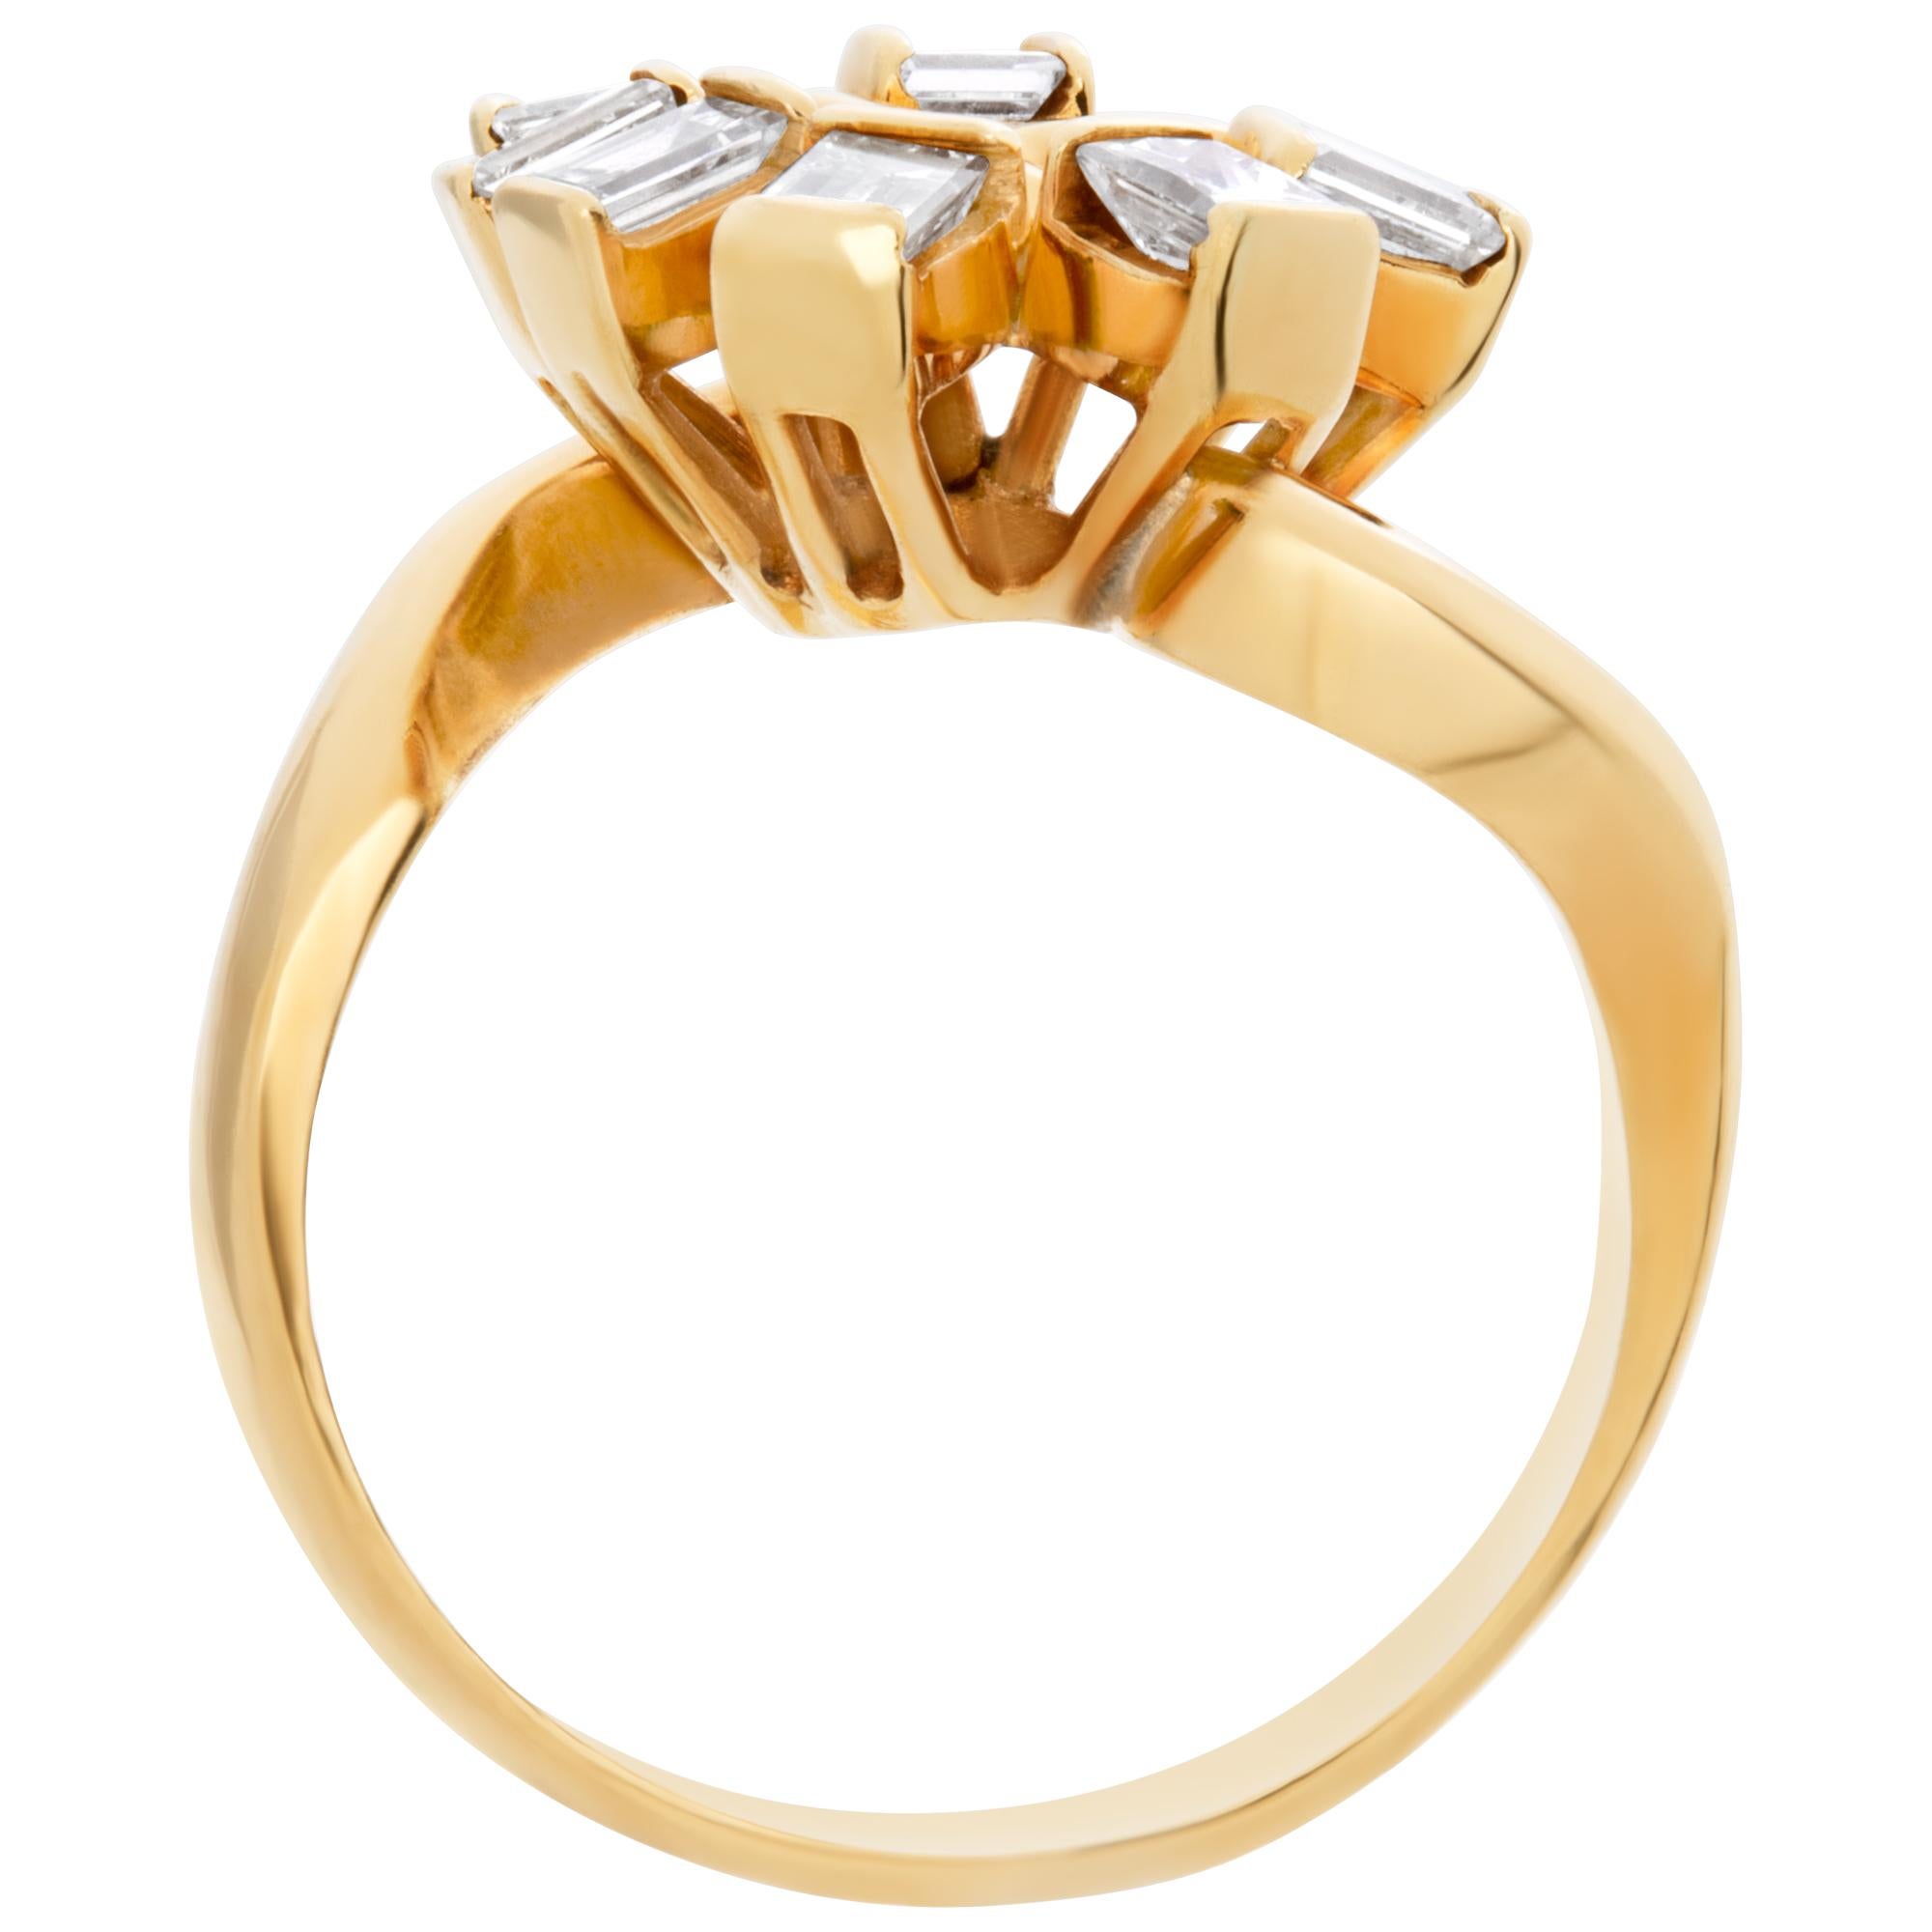 Women's Swirl ring with diamonds set in 18k yellow gold For Sale